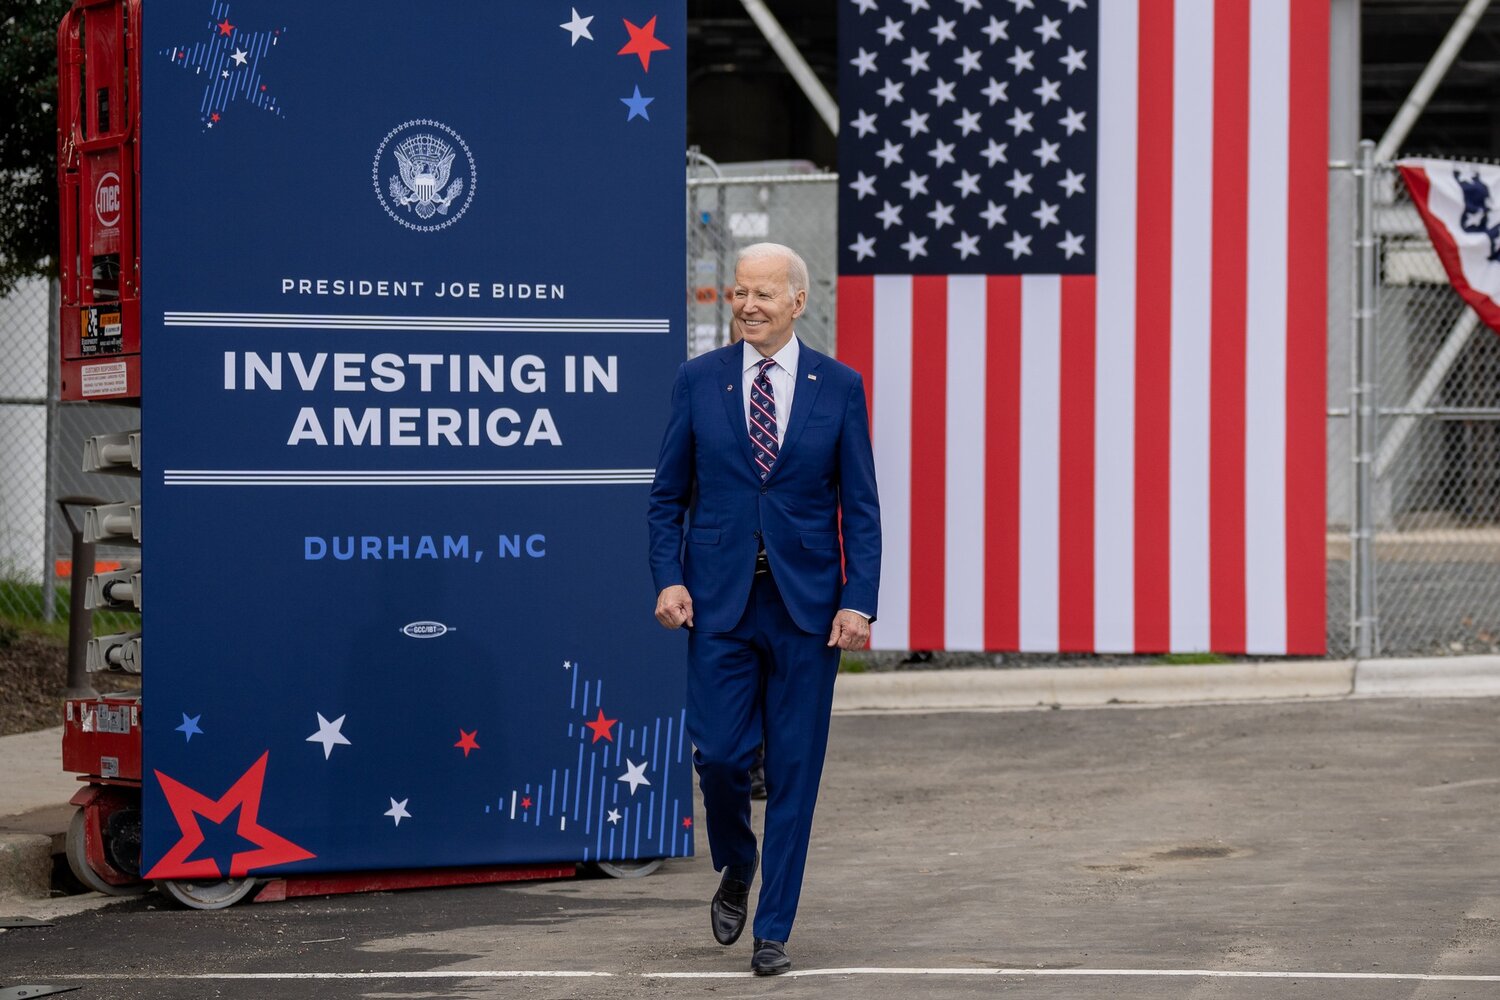 President Joe Biden arrives to deliver remarks for the kickoff of his âInvesting in Americaâ tour, Tuesday, March 28, 2023, at the Wolfspeed semiconductor manufacturing facility in Durham, North Carolina. (Official White House Photo by Adam Schultz)